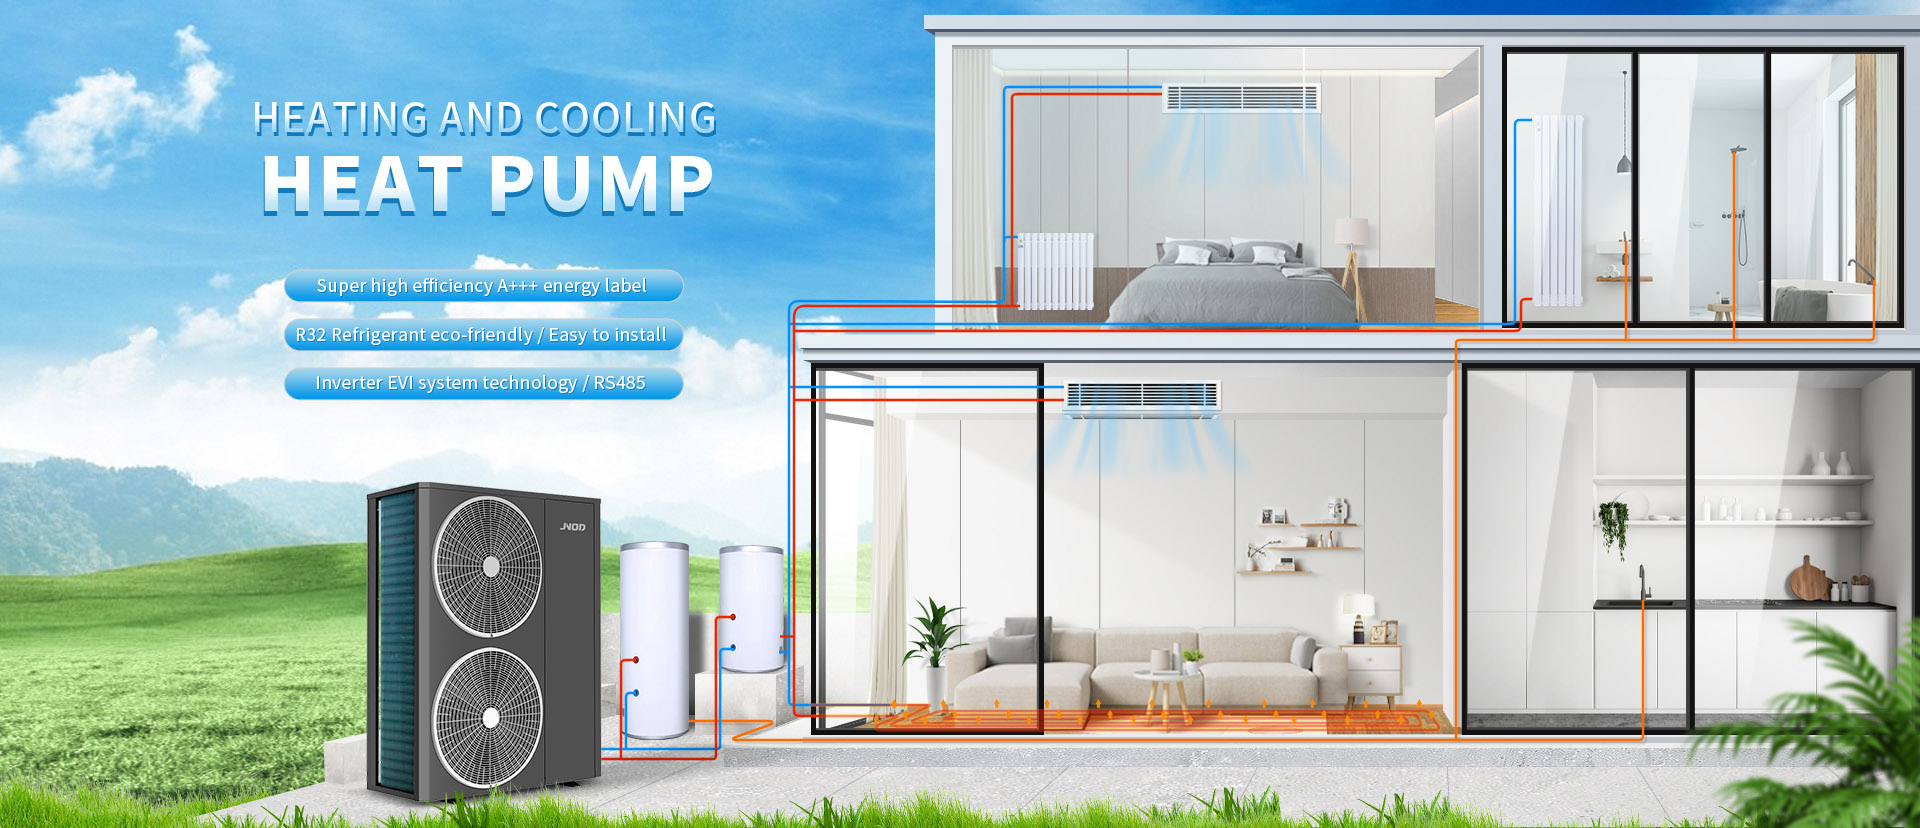 Commercial Swimming Pool Heat Pump